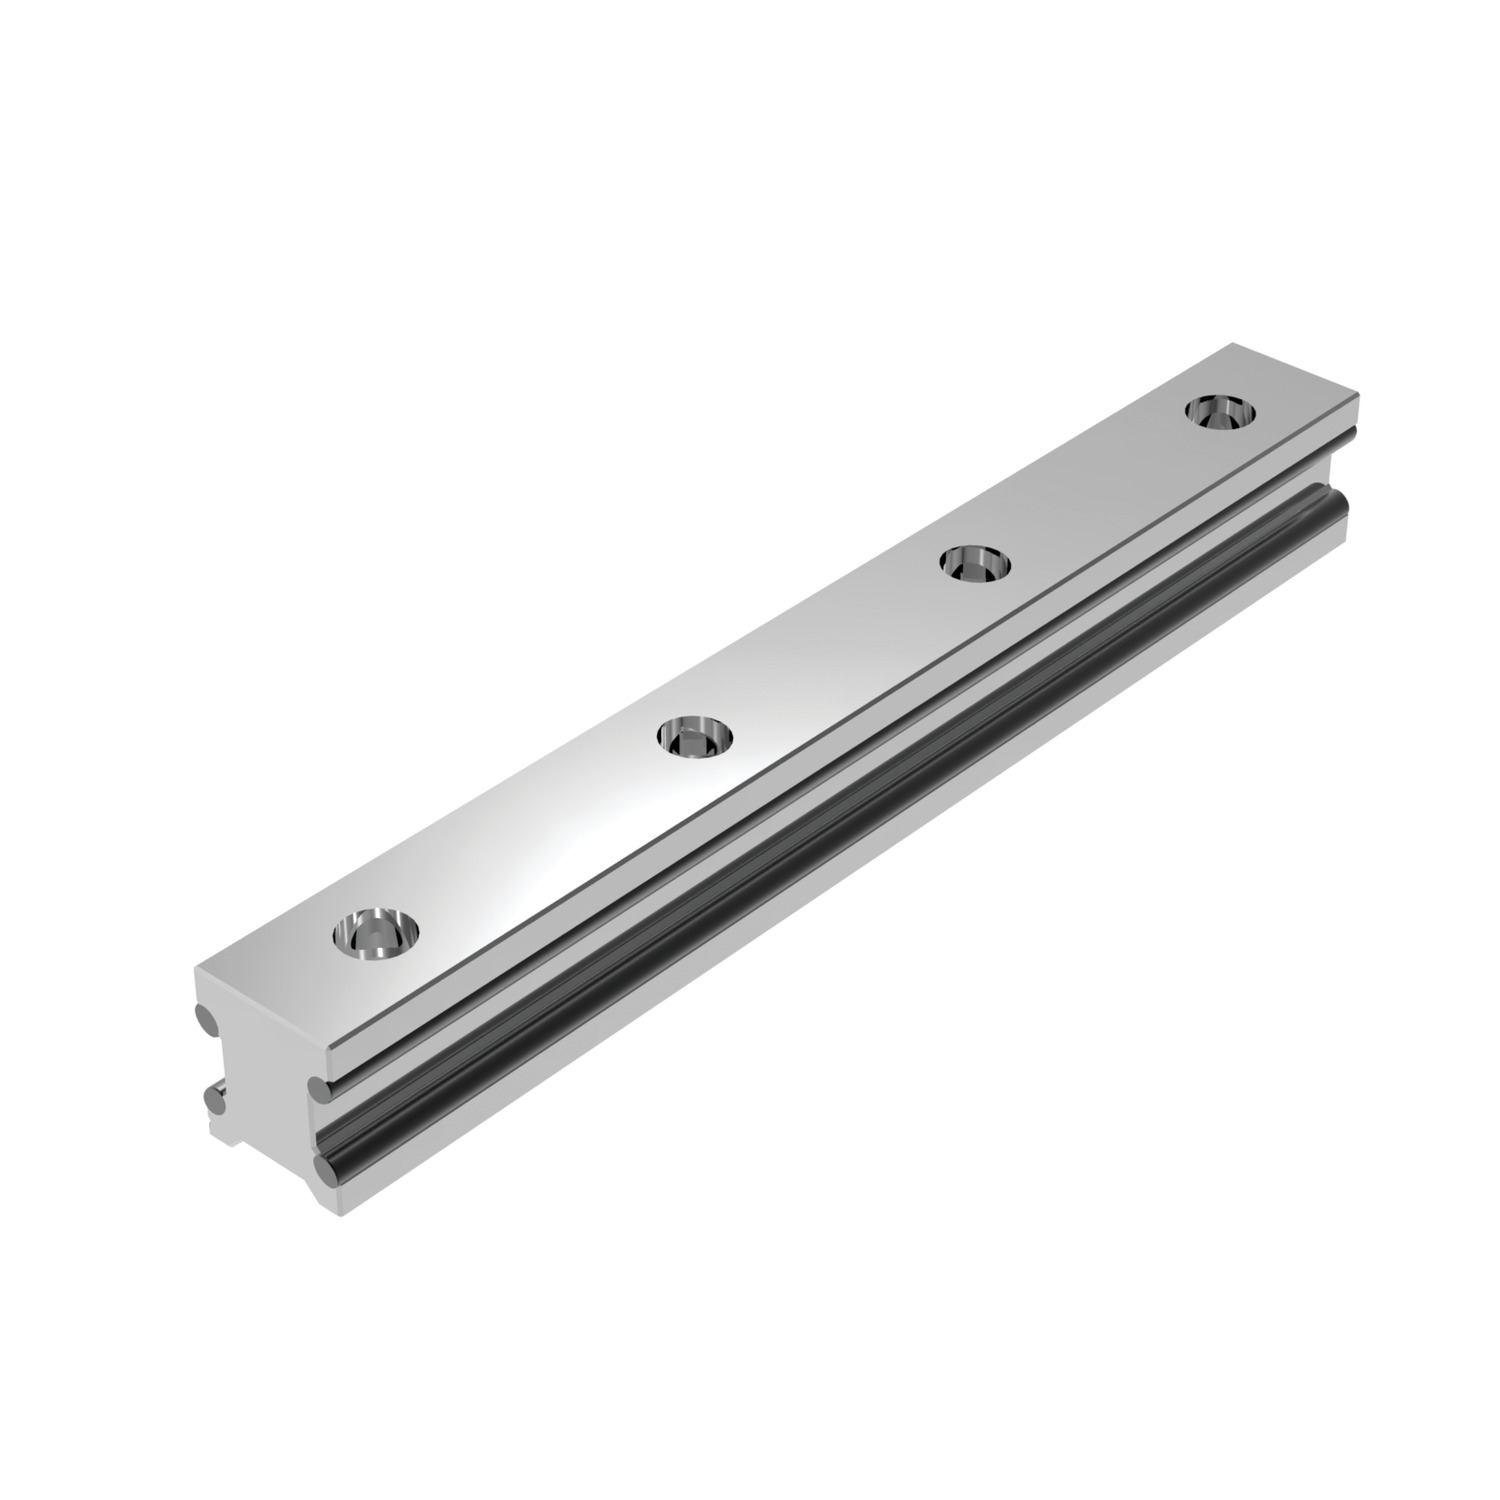 Product L1018.15, 15mm Aluminium Linear Guide Rail with stainless raceways / 